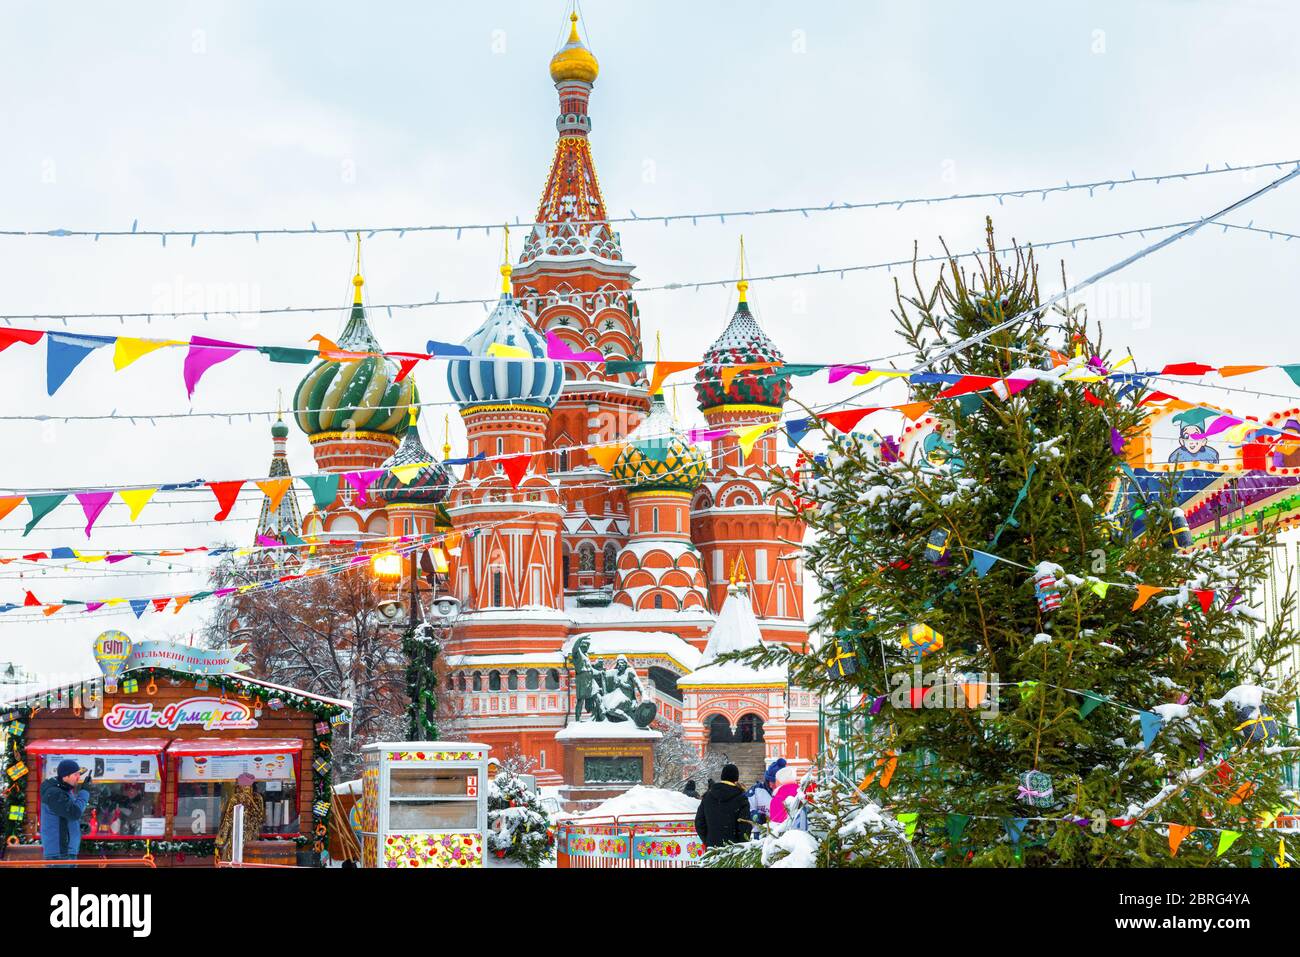 Moscow, Russia - Feb 5, 2018: Scenery of the festive Red Square in winter Moscow. Christmas decorations near the Moscow Kremlin during snowfall. New Y Stock Photo